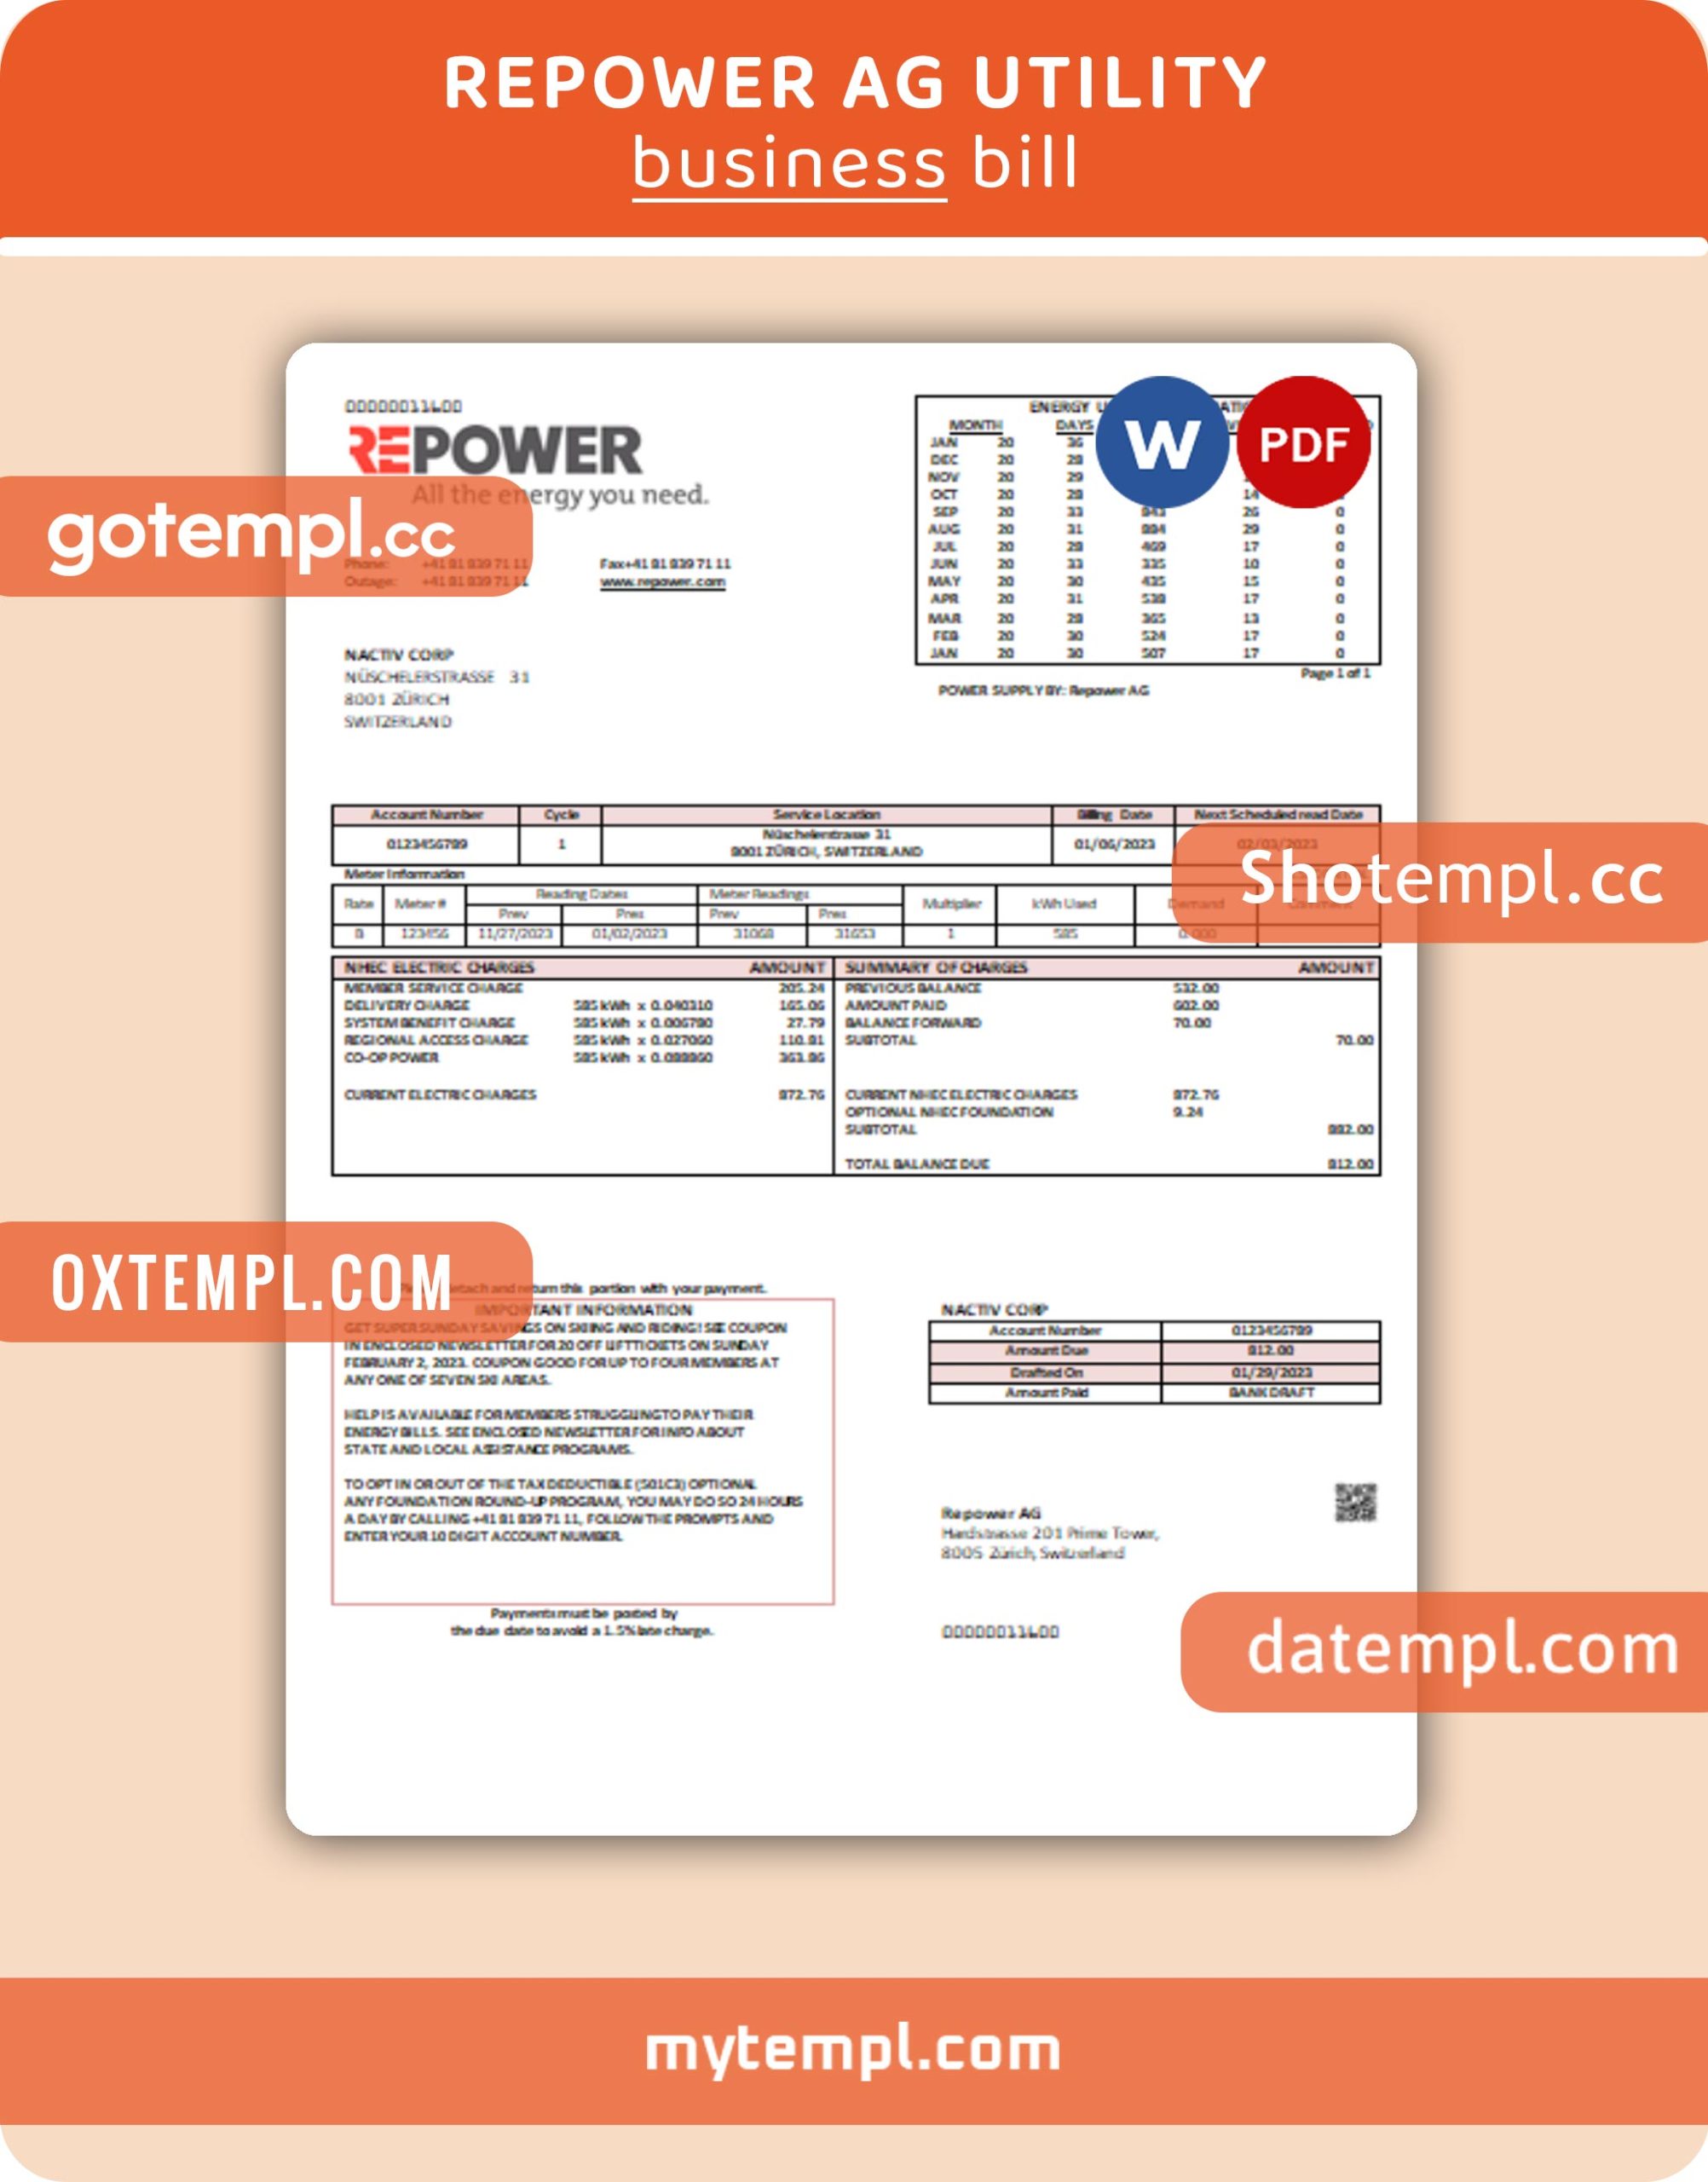 Repower AG business utility bill, Word and PDF template